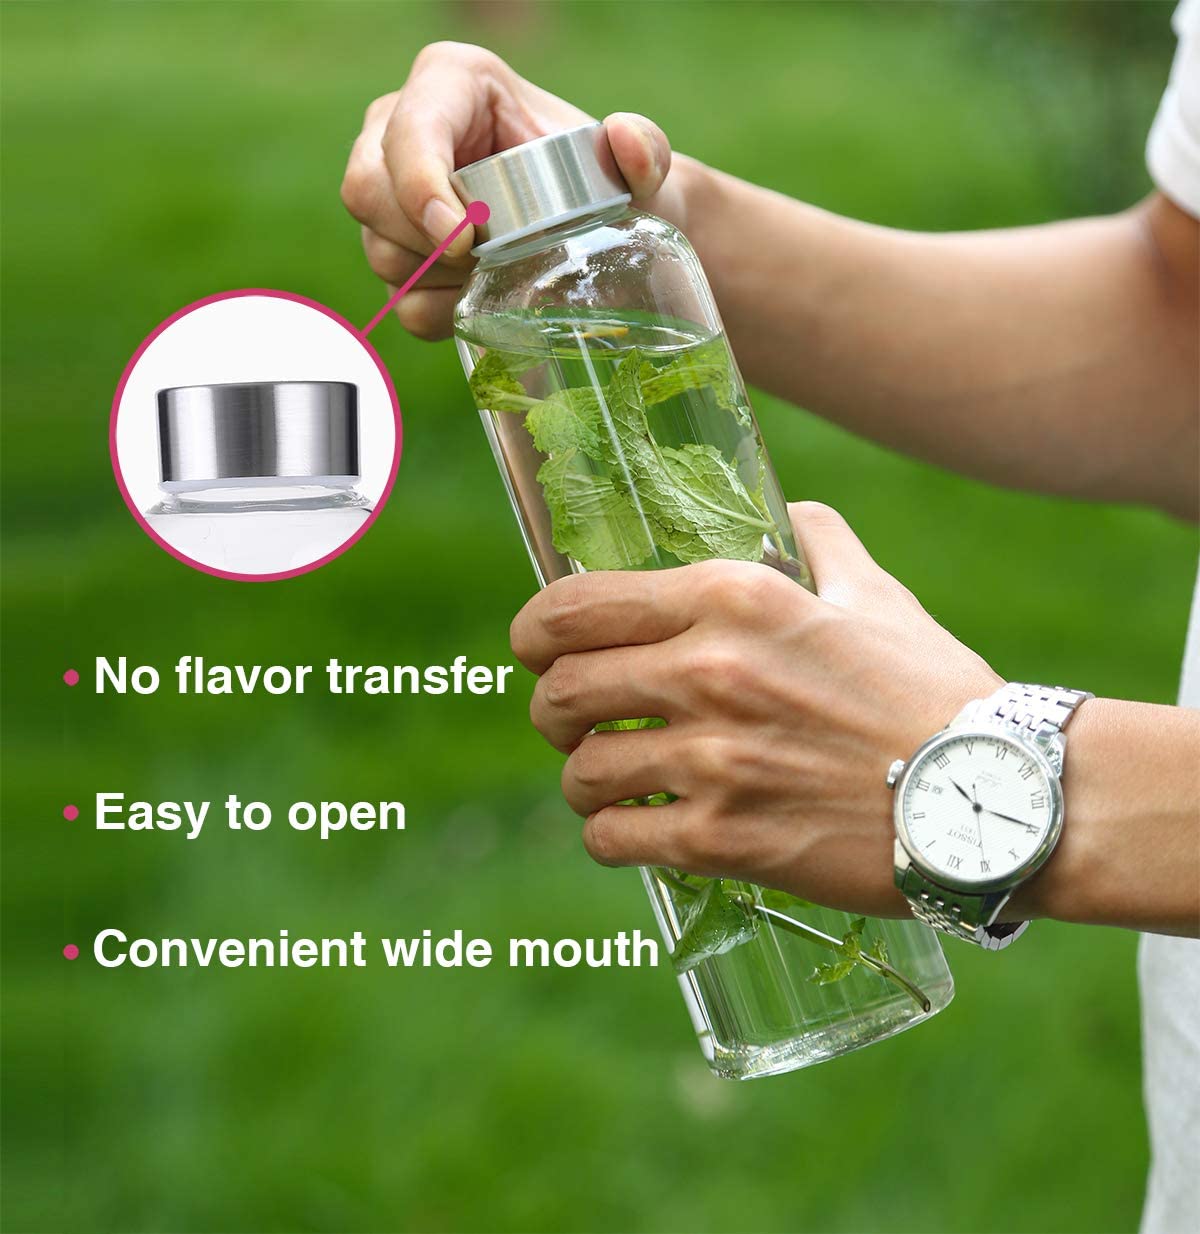 Amazon best seller 18Oz Glass Beverage Bottles water bottle glass with stainless Steel lid with - Leak-Proof Lid